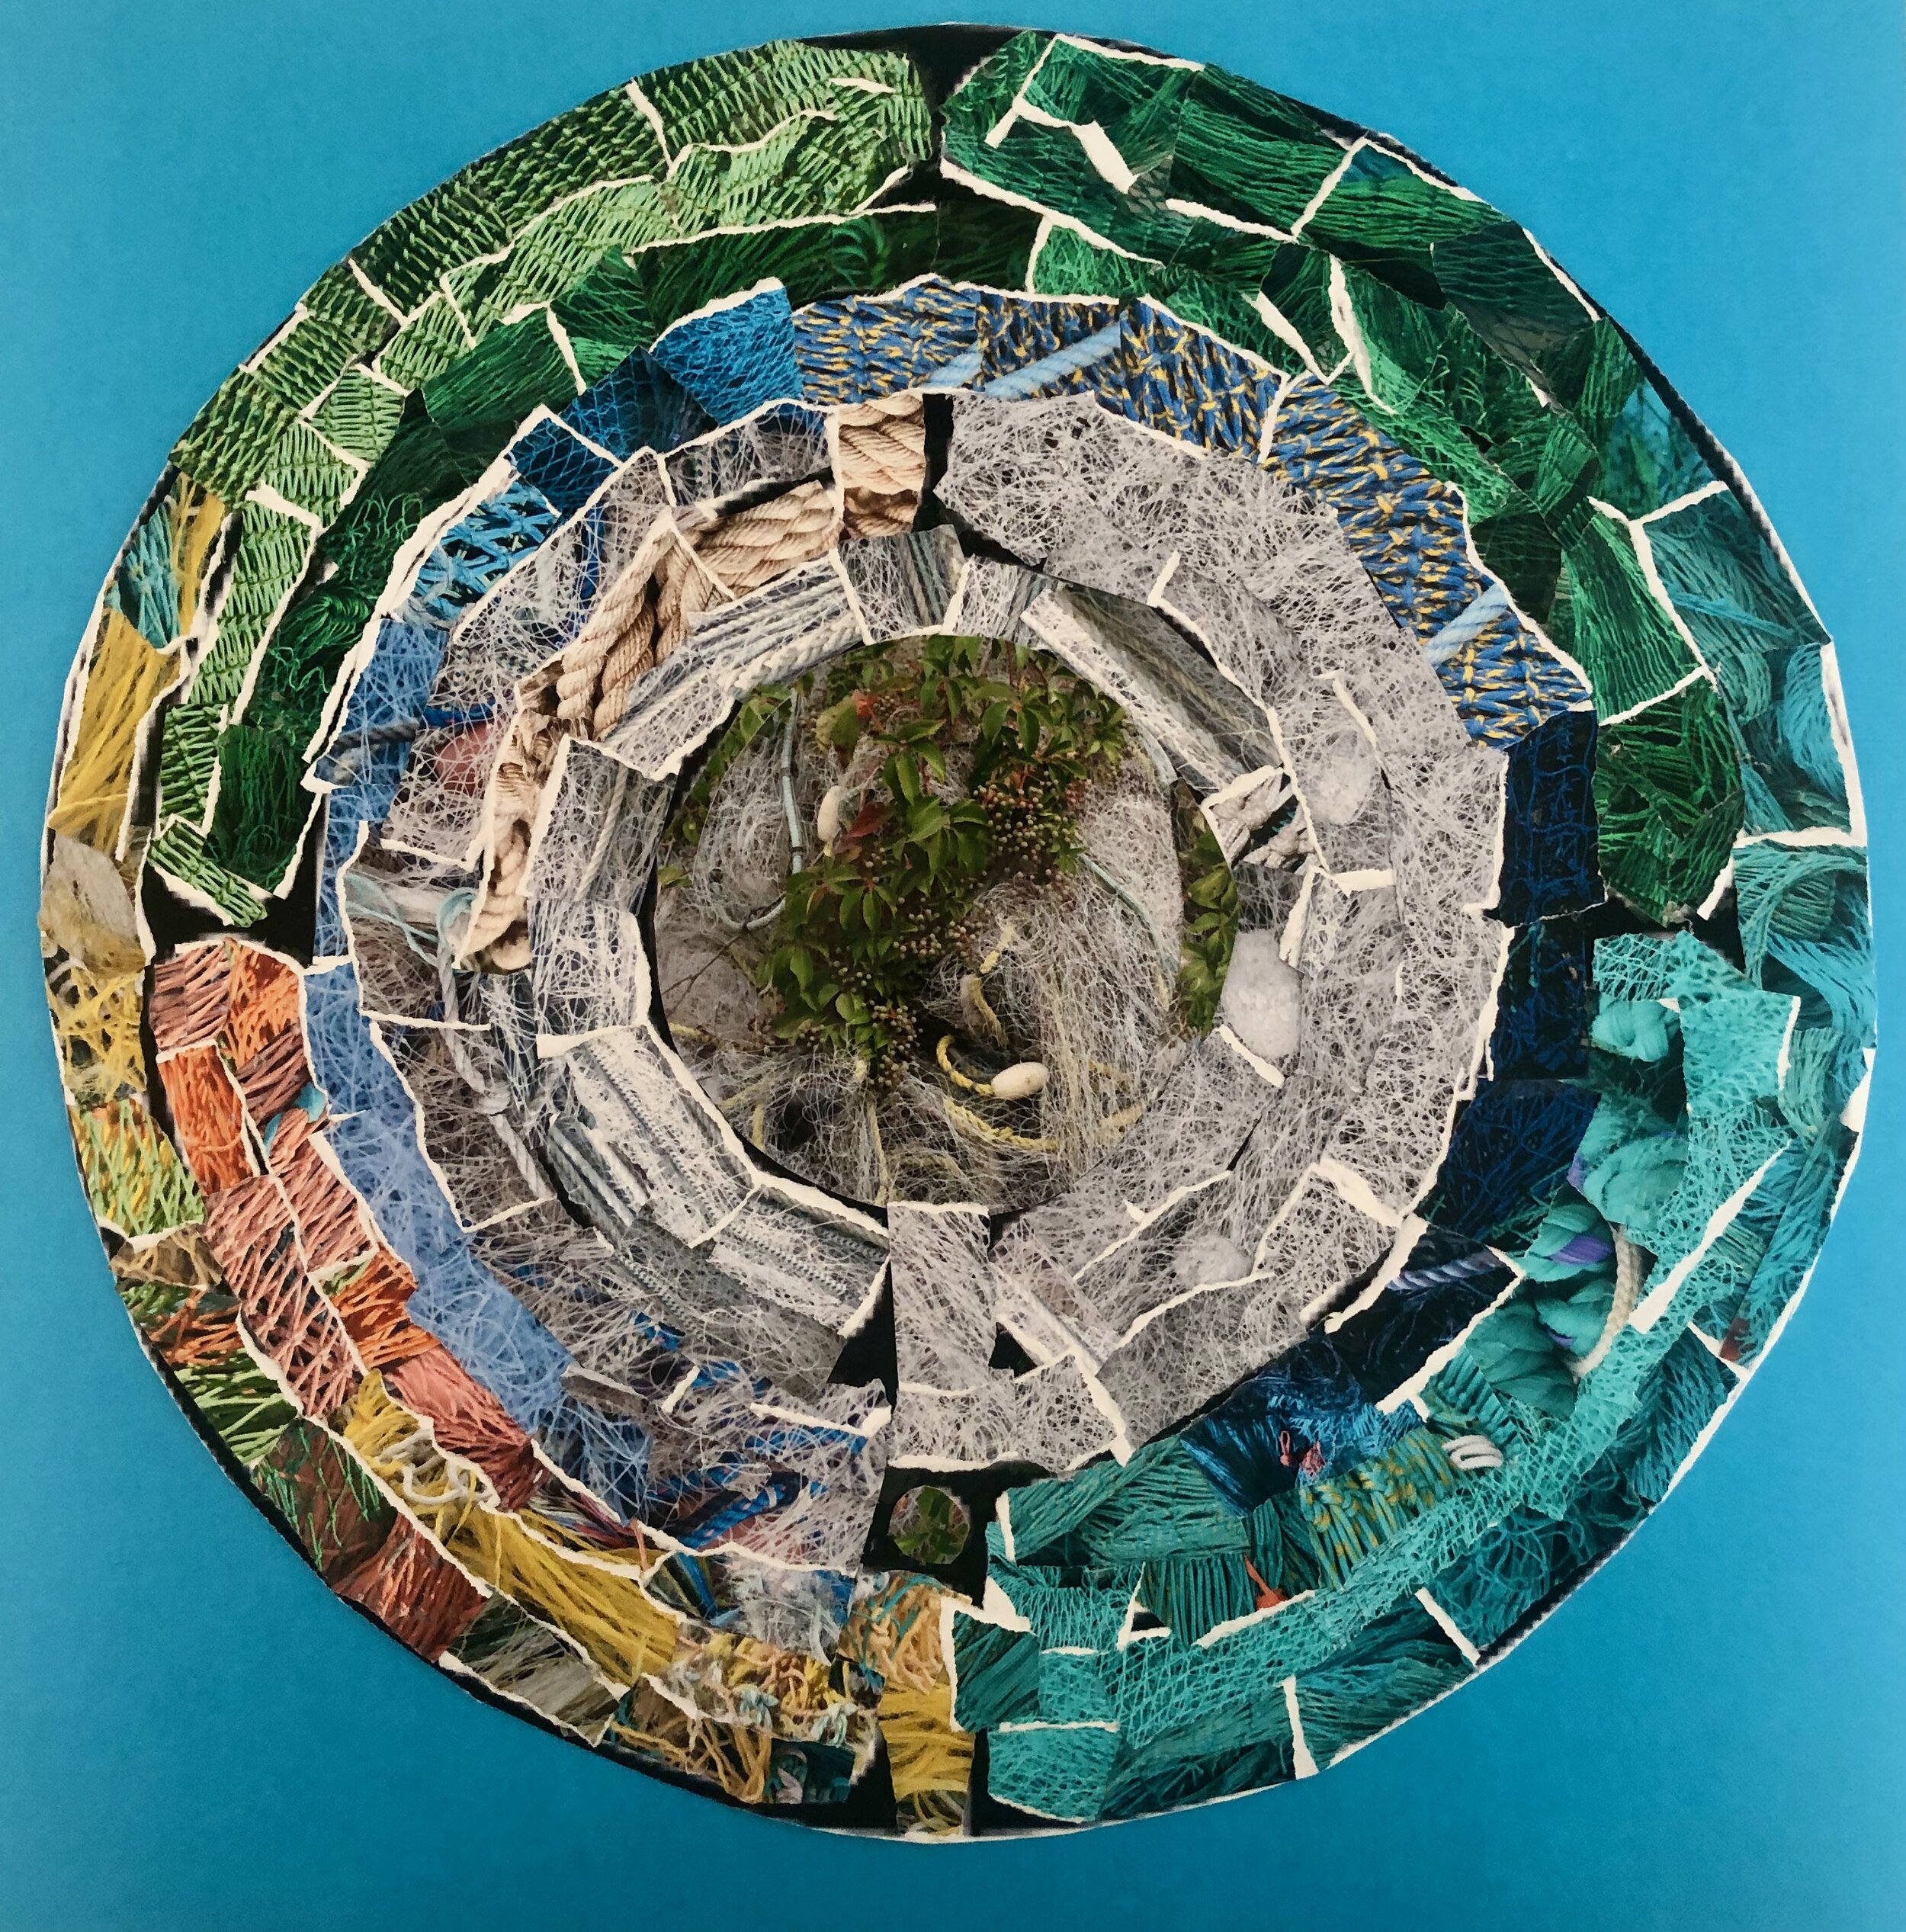 Labyrinth 1  Torn photos of fishing nets   2019  **All photos I used throughout this gallery are my own.  Diameter of all labyrinths is 11".  